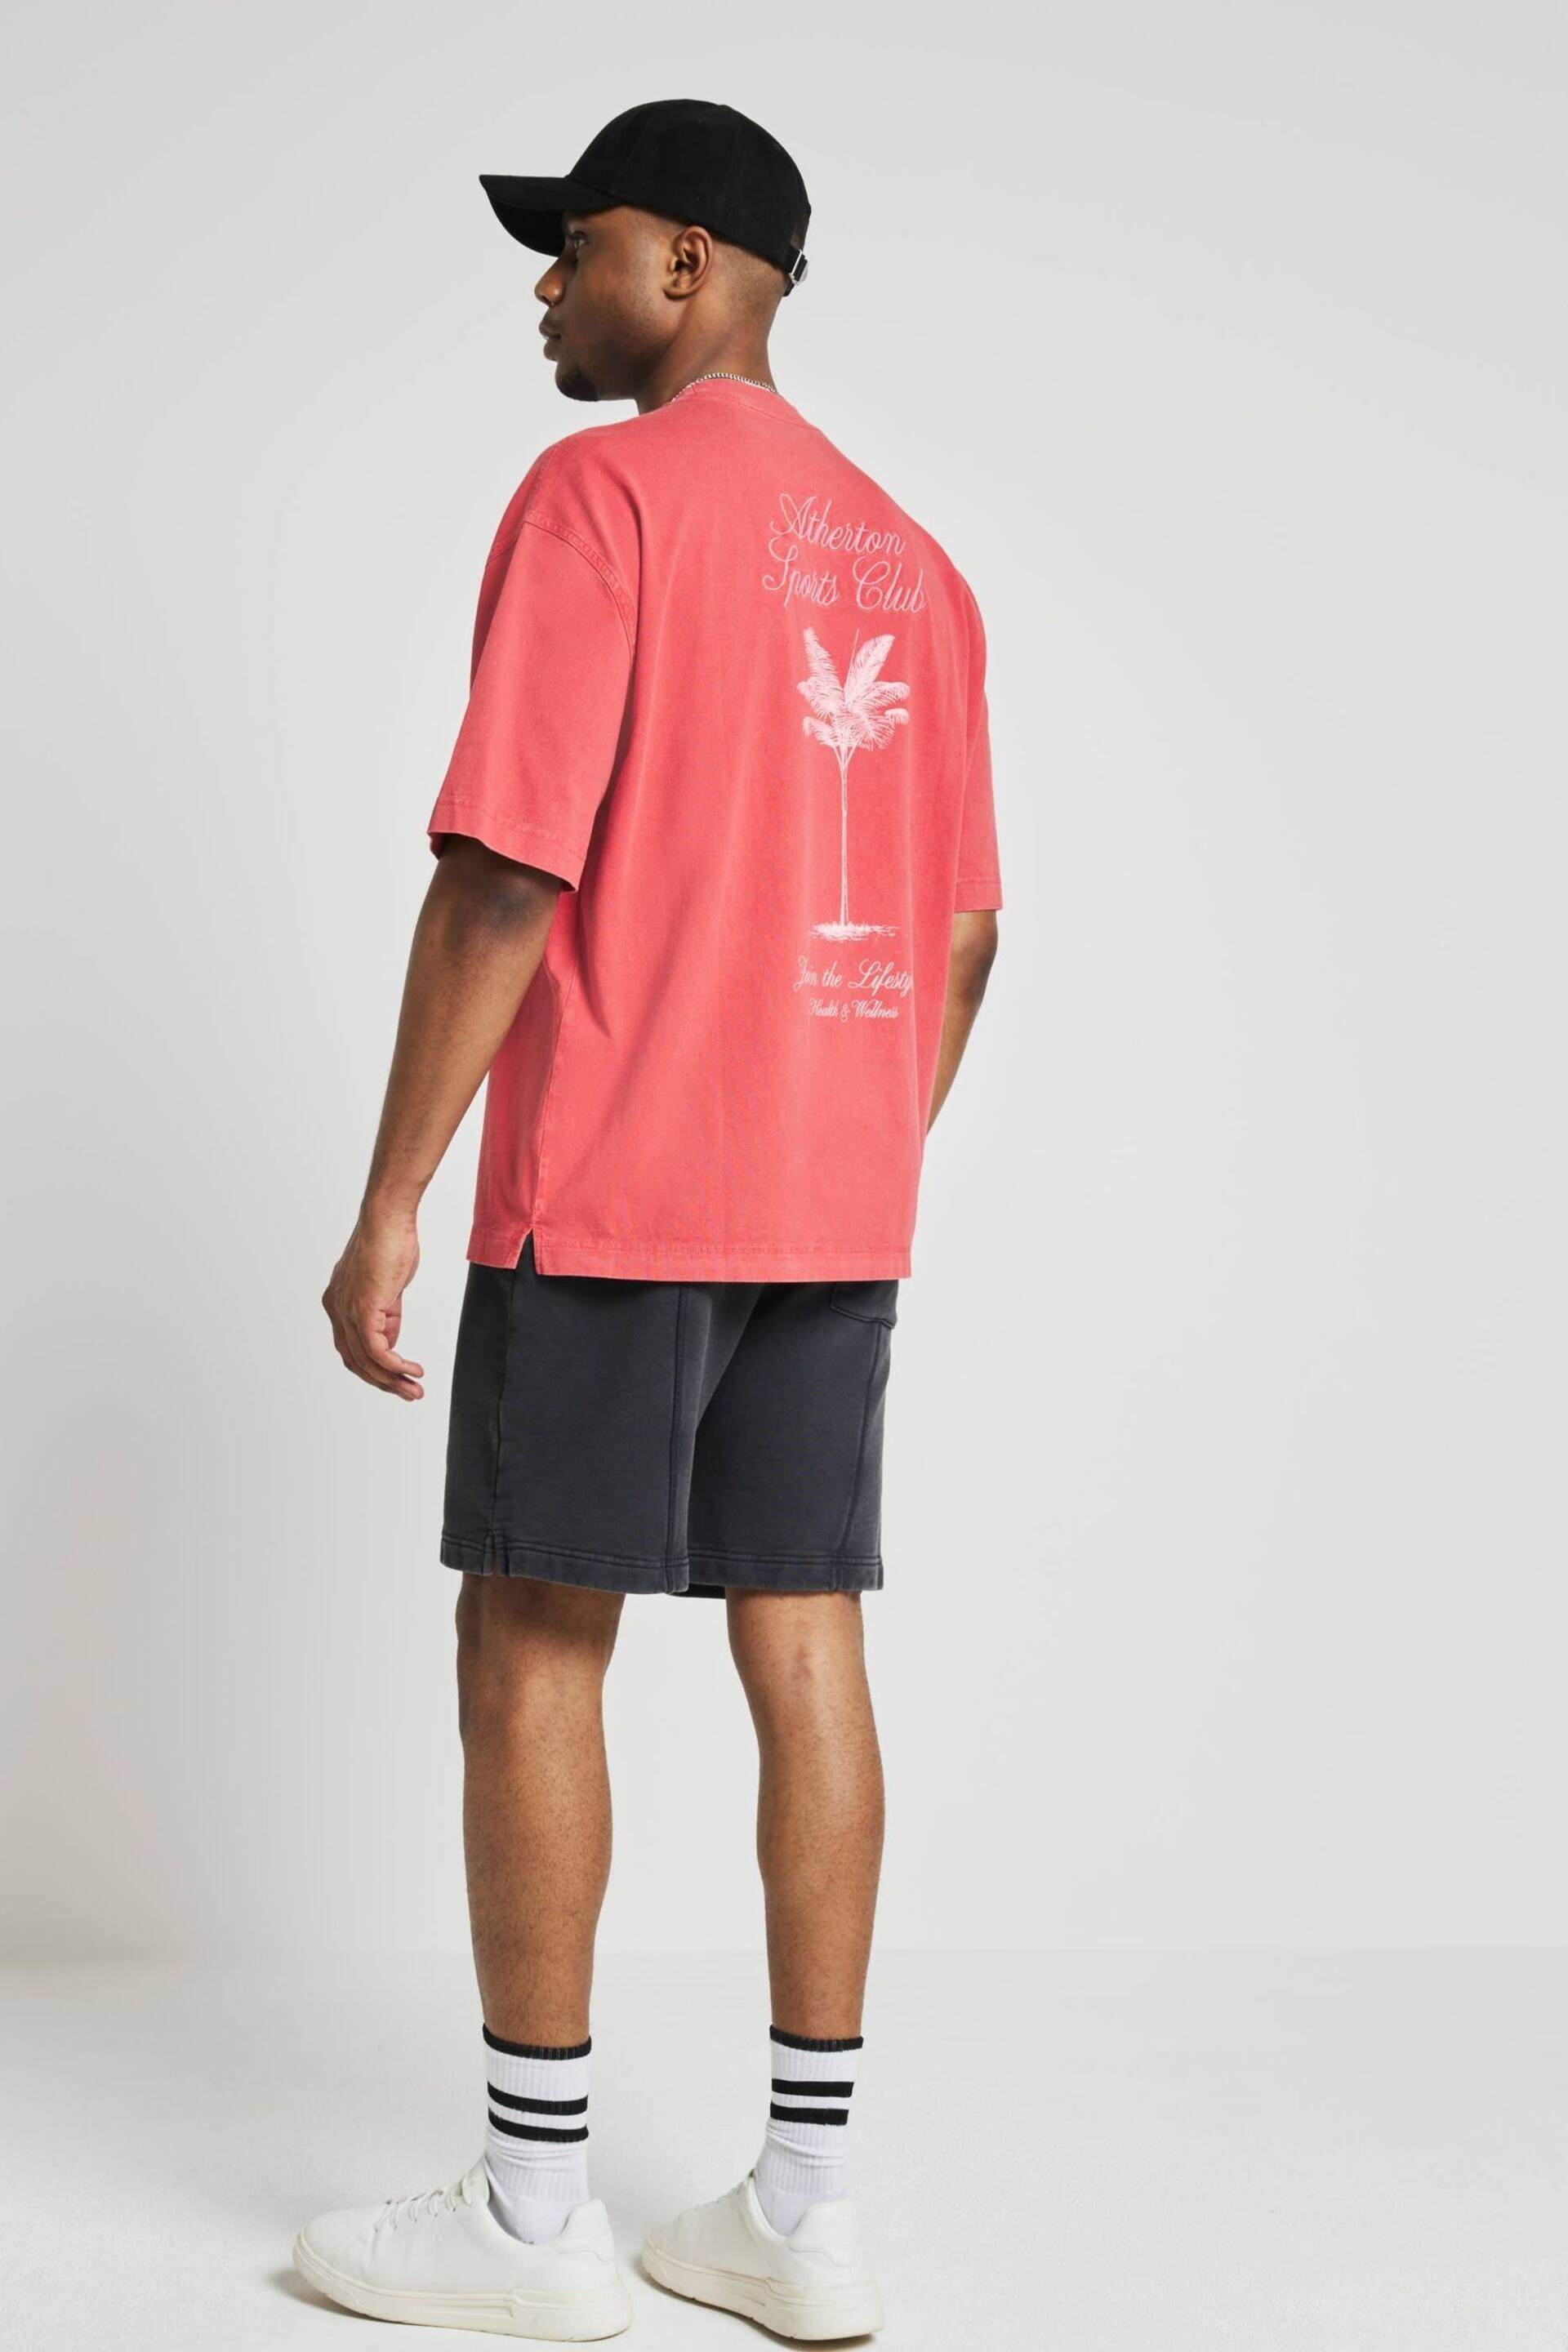 River Island Red Regular Fit Atherton Sports T-Shirt - Image 1 of 4